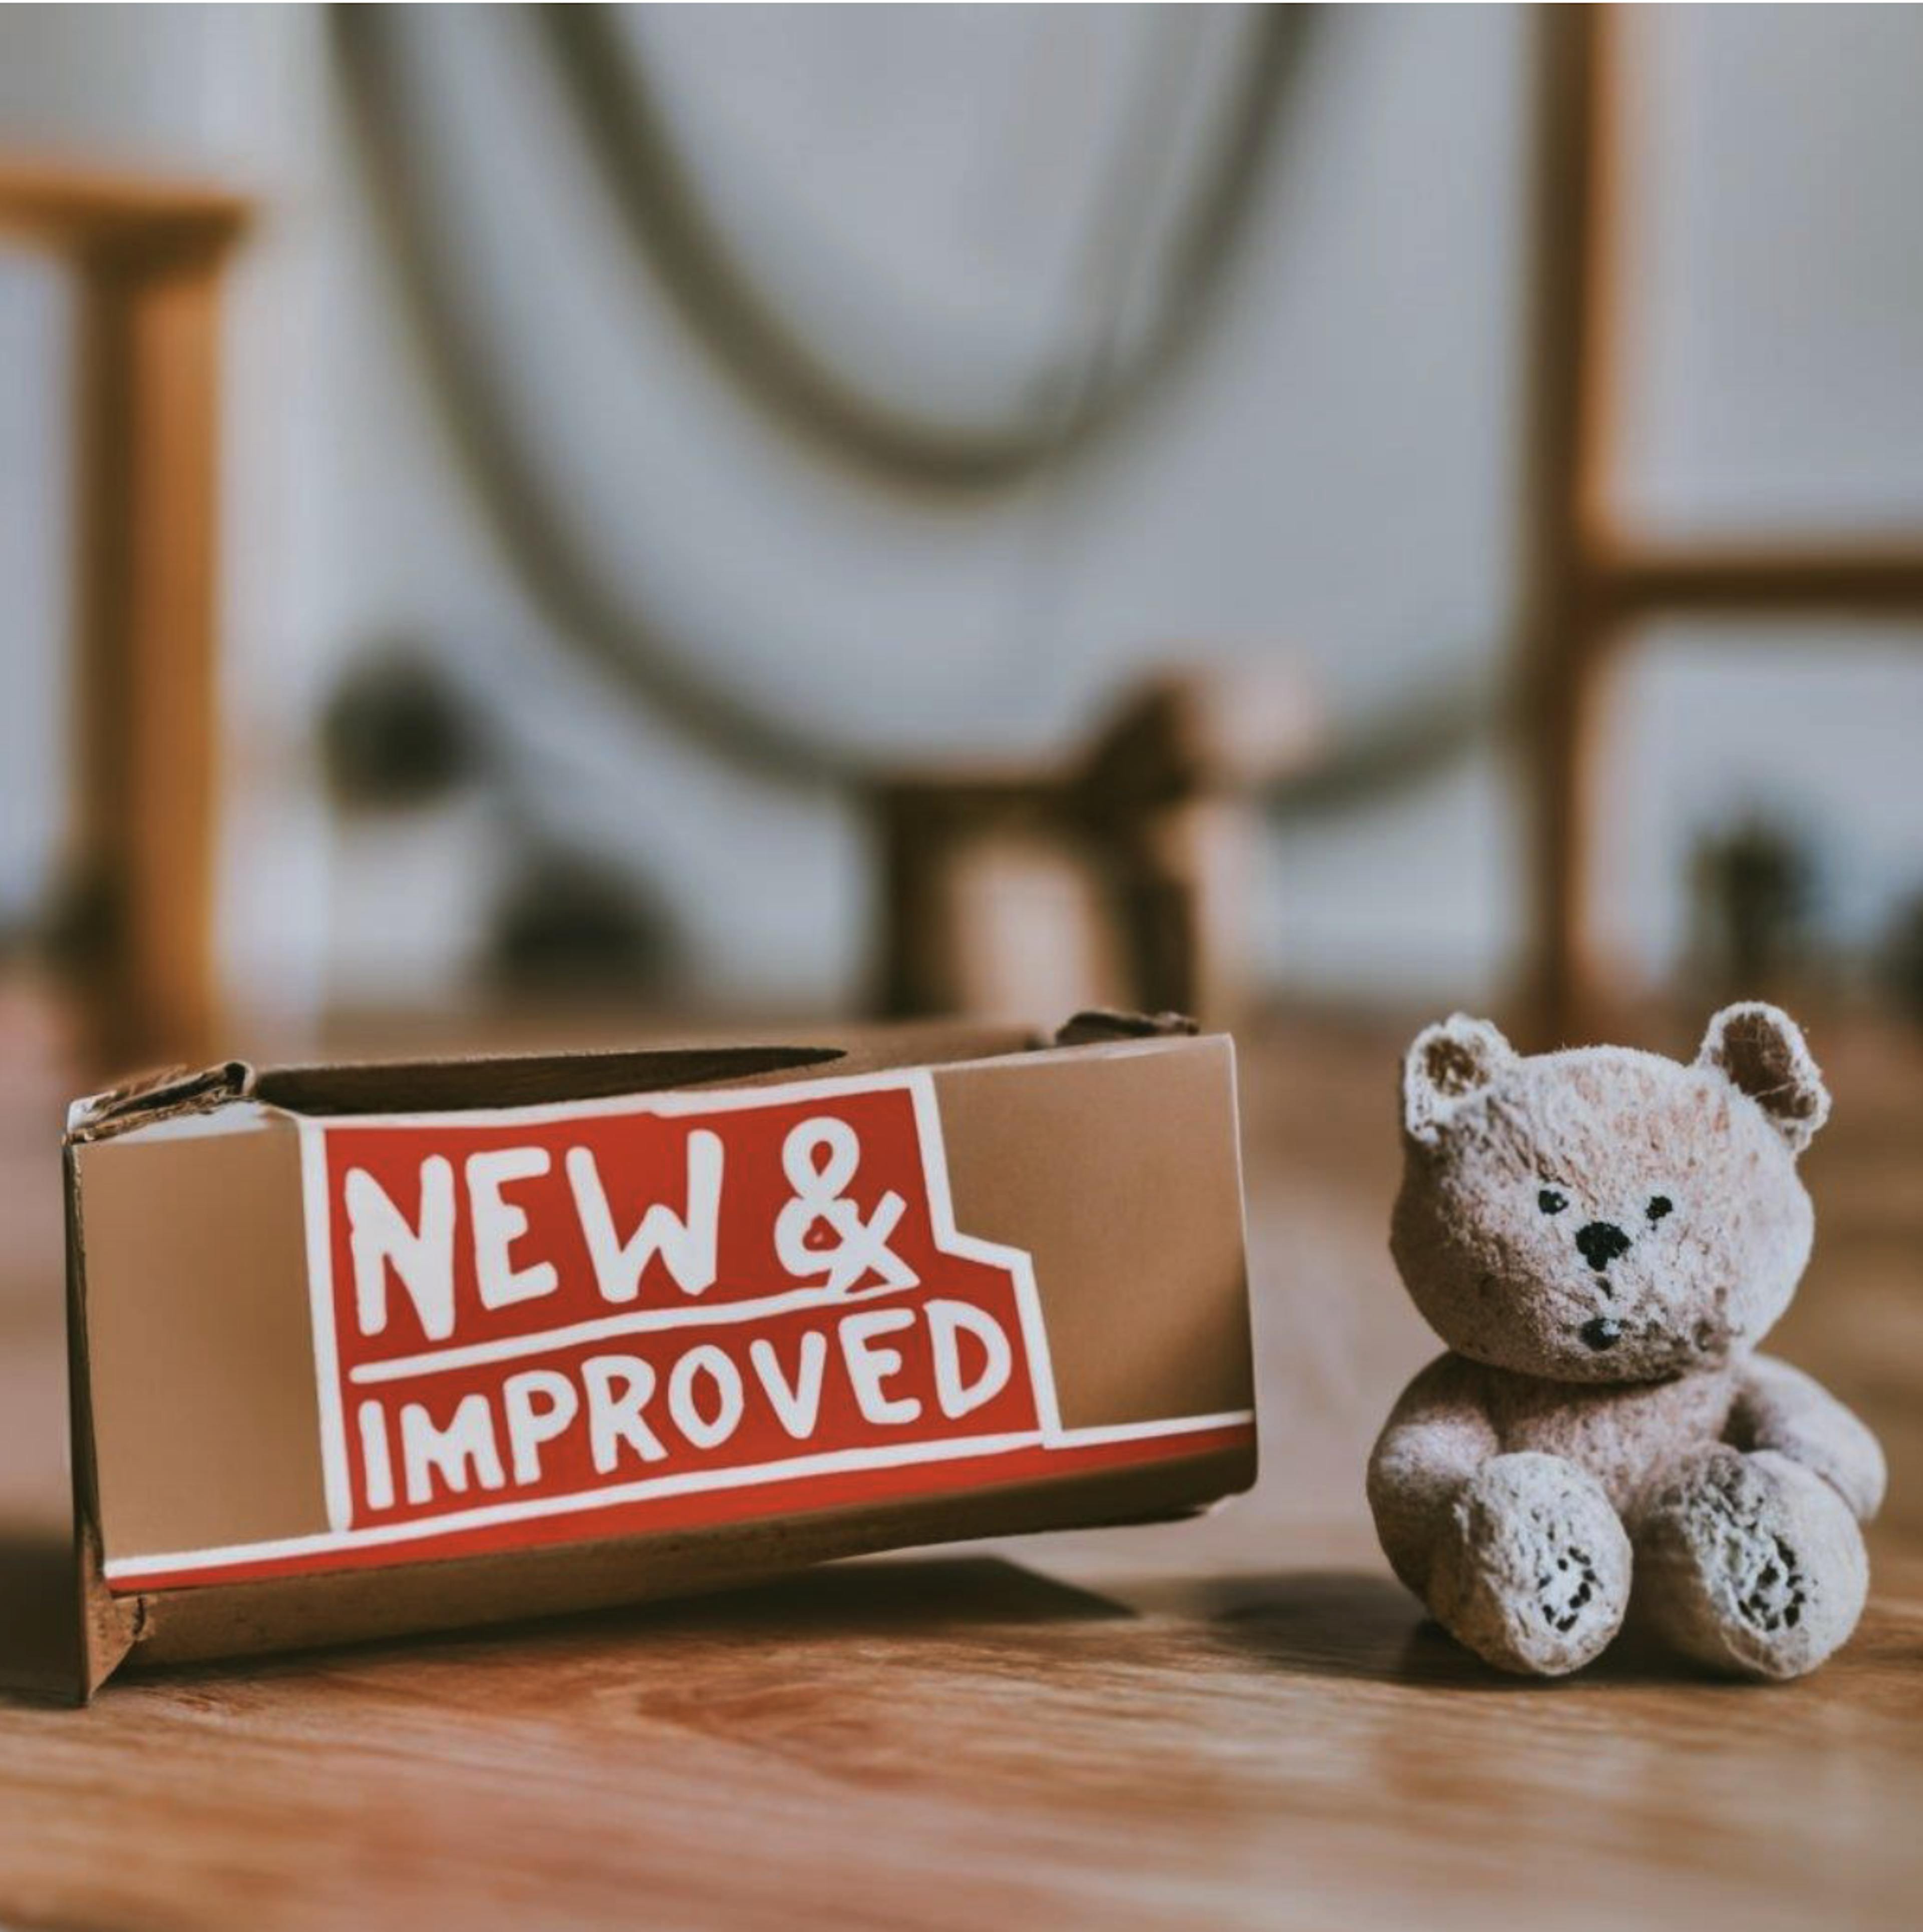 A box that says "new & improved" and a teddy bear